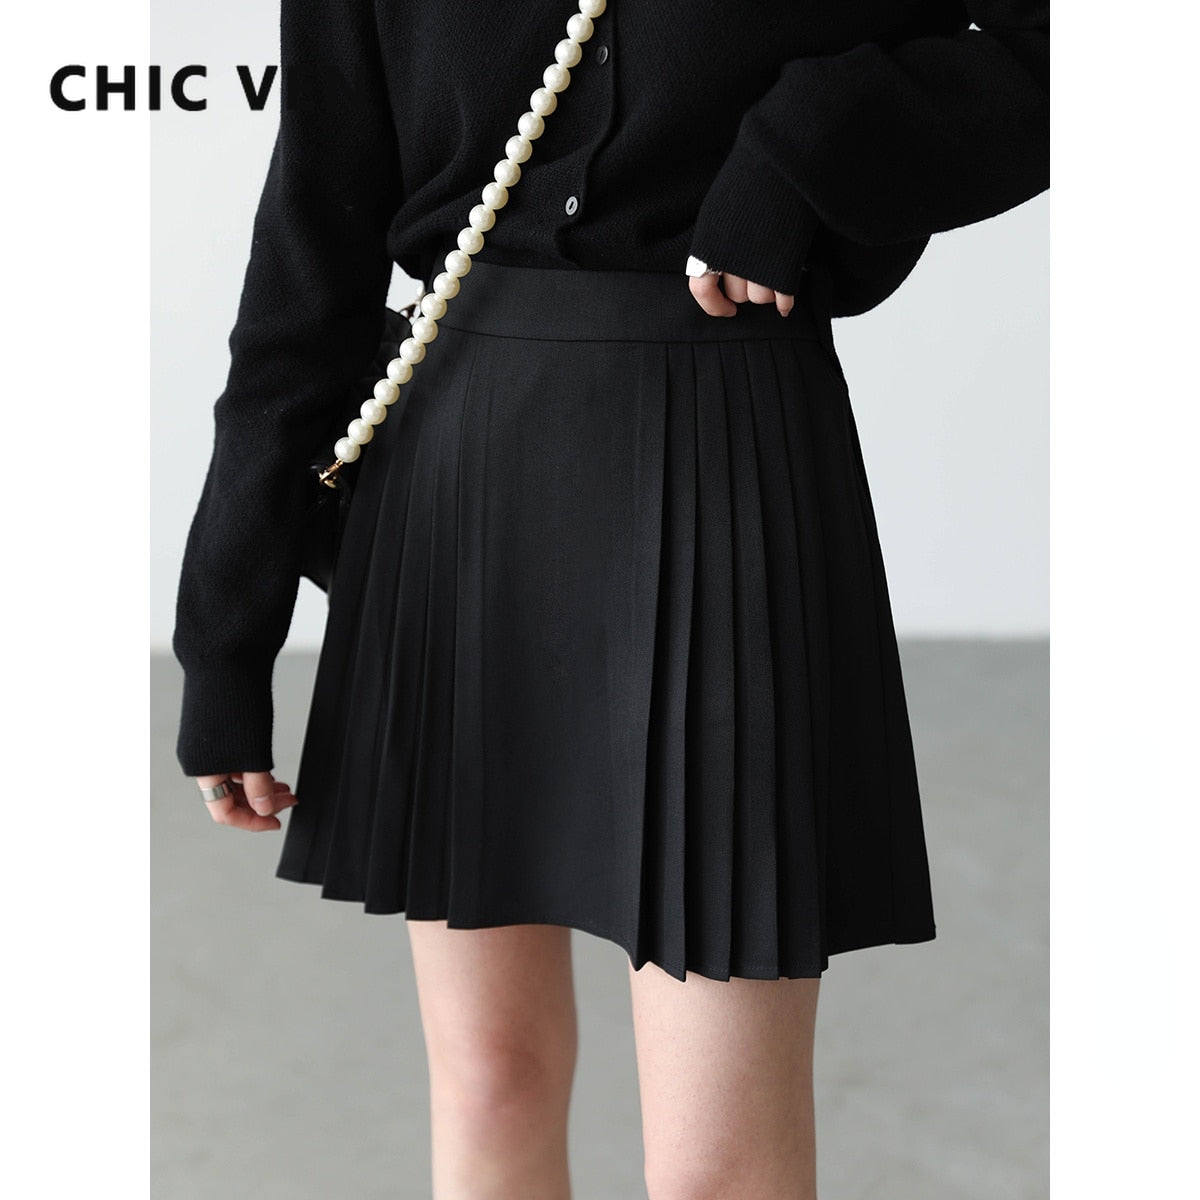 Clacive  Fashion Women's High Waist Skirts Solid College Style A Line Pleated Skirt Short Offie Lady Spring Summer  School